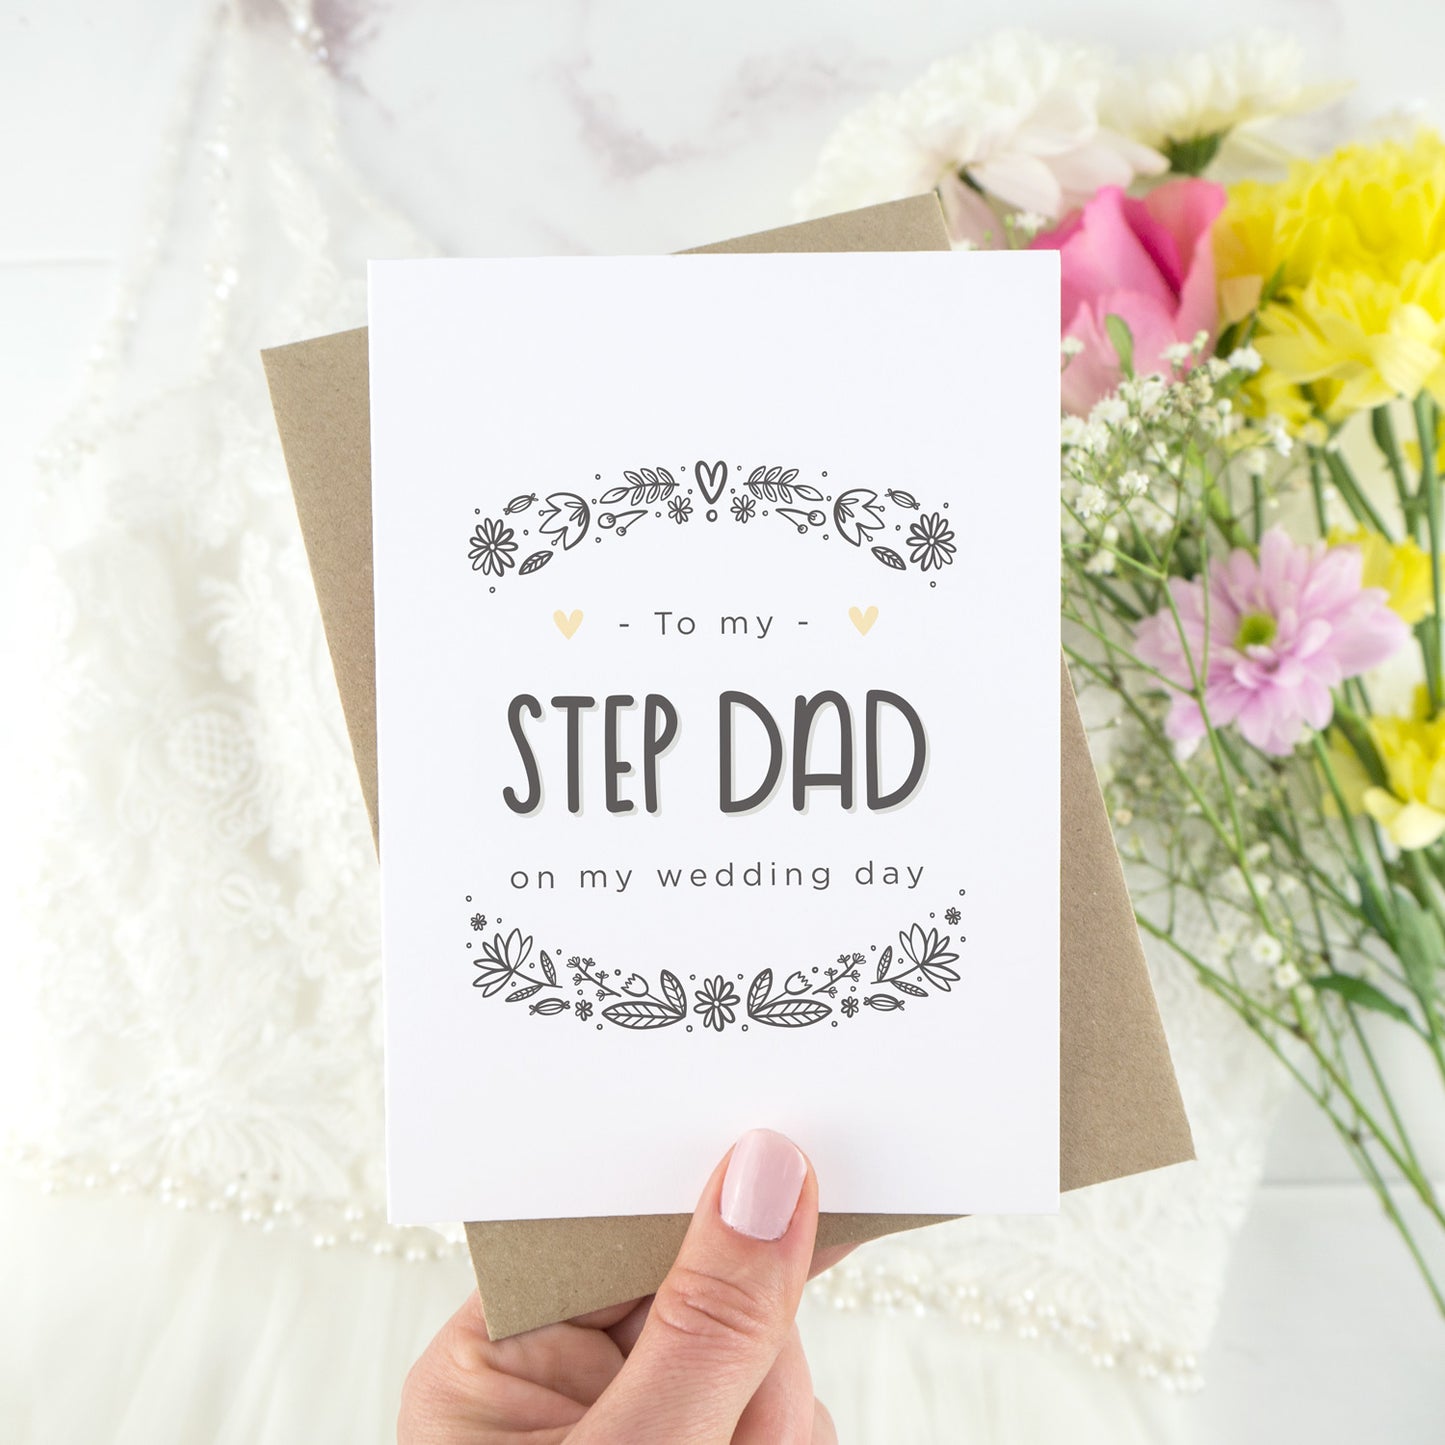 To my step dad on my wedding day. A white card with grey hand drawn lettering, and a grey floral border. The image features a wedding dress and bouquet of flowers.